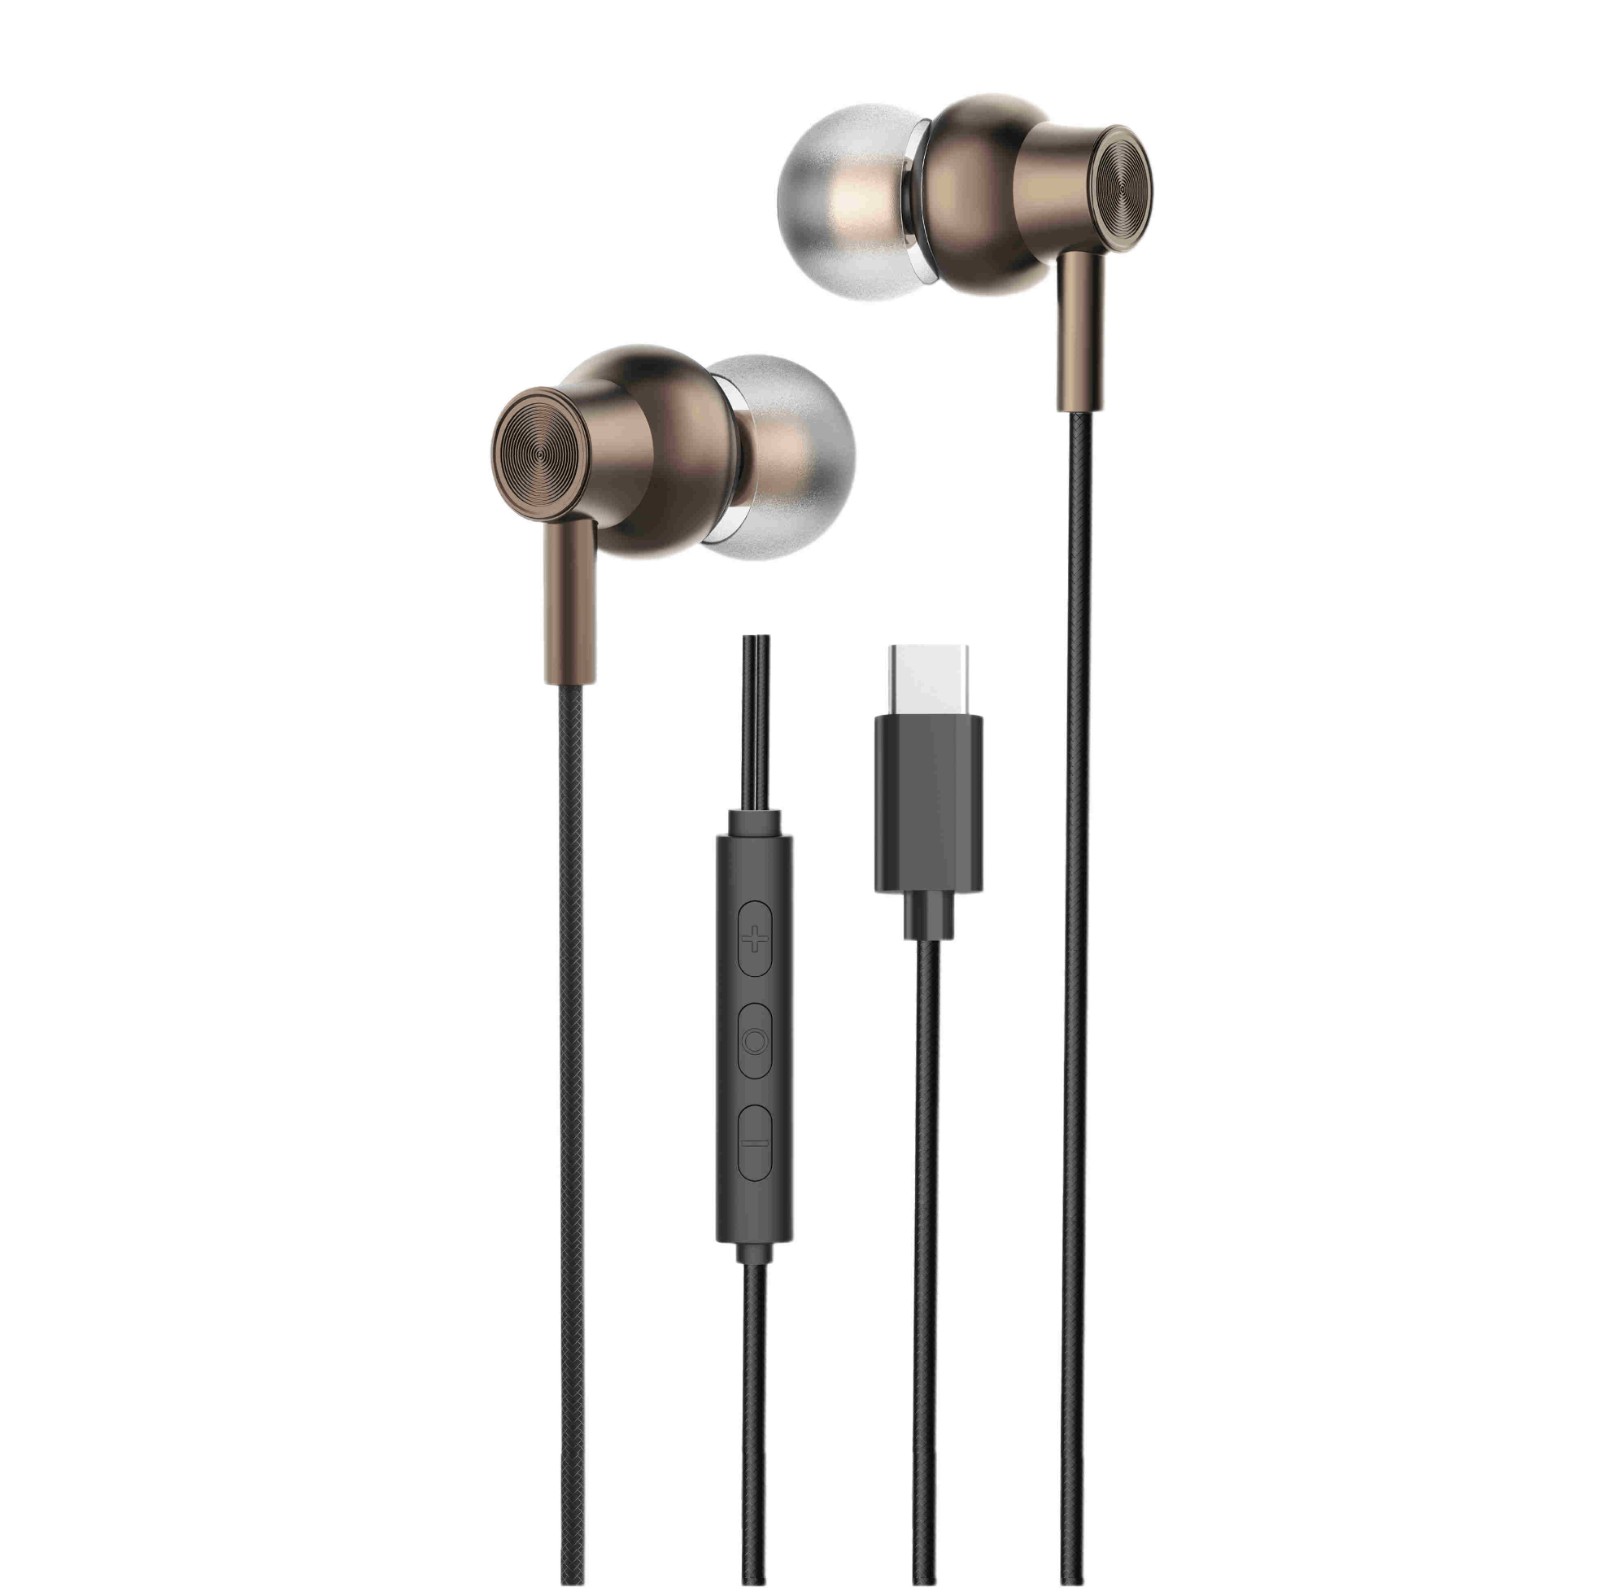 LS-729 In-ear Wired Earphone HiFi Headphones With Subwoofer Earbuds Earphones TYPE-C Music Sports Gaming Headset With Mic BLACK